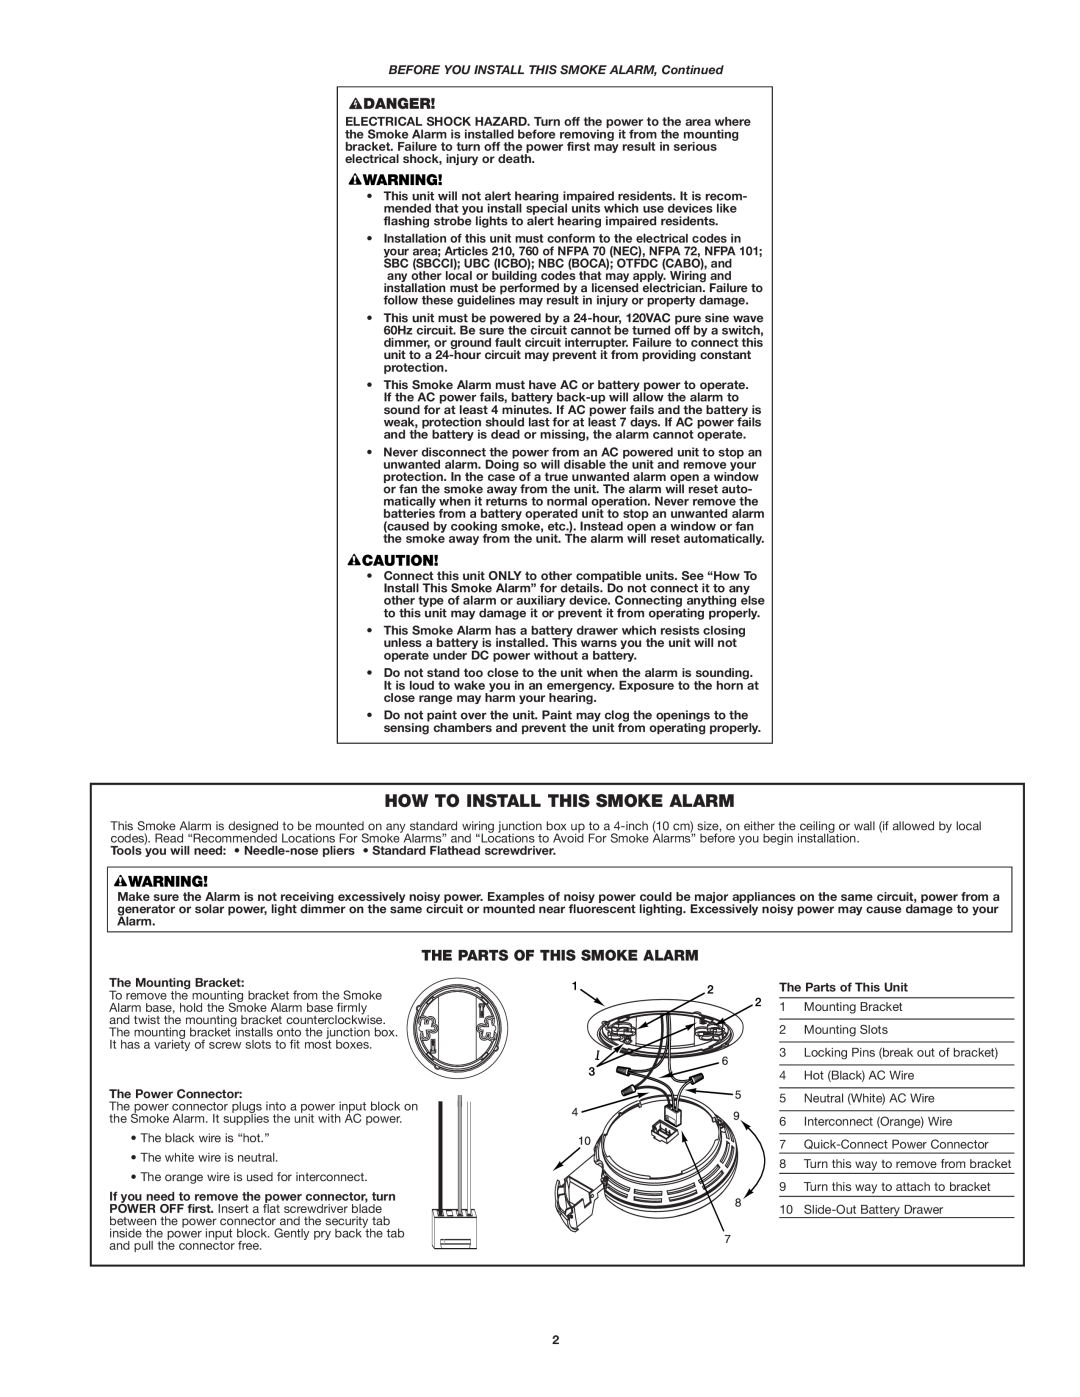 First Alert 7020b user manual How To Install This Smoke Alarm, The Parts Of This Smoke Alarm 